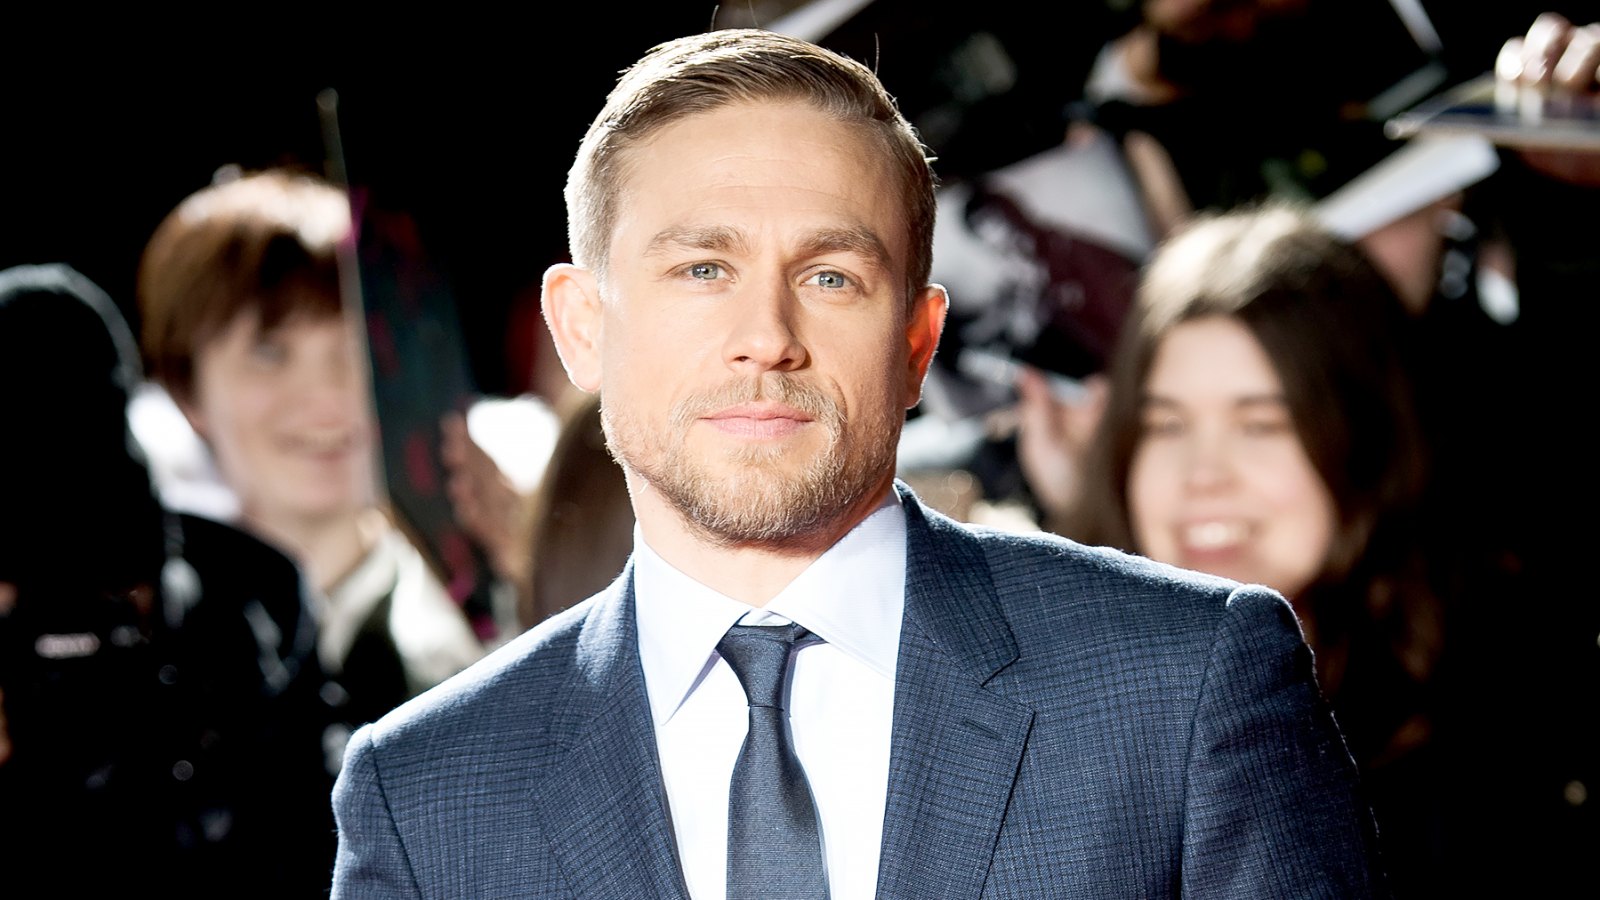 Charlie Hunnam arrive at The Lost City of Z UK premiere on February 16, 2017 in London, United Kingdom.